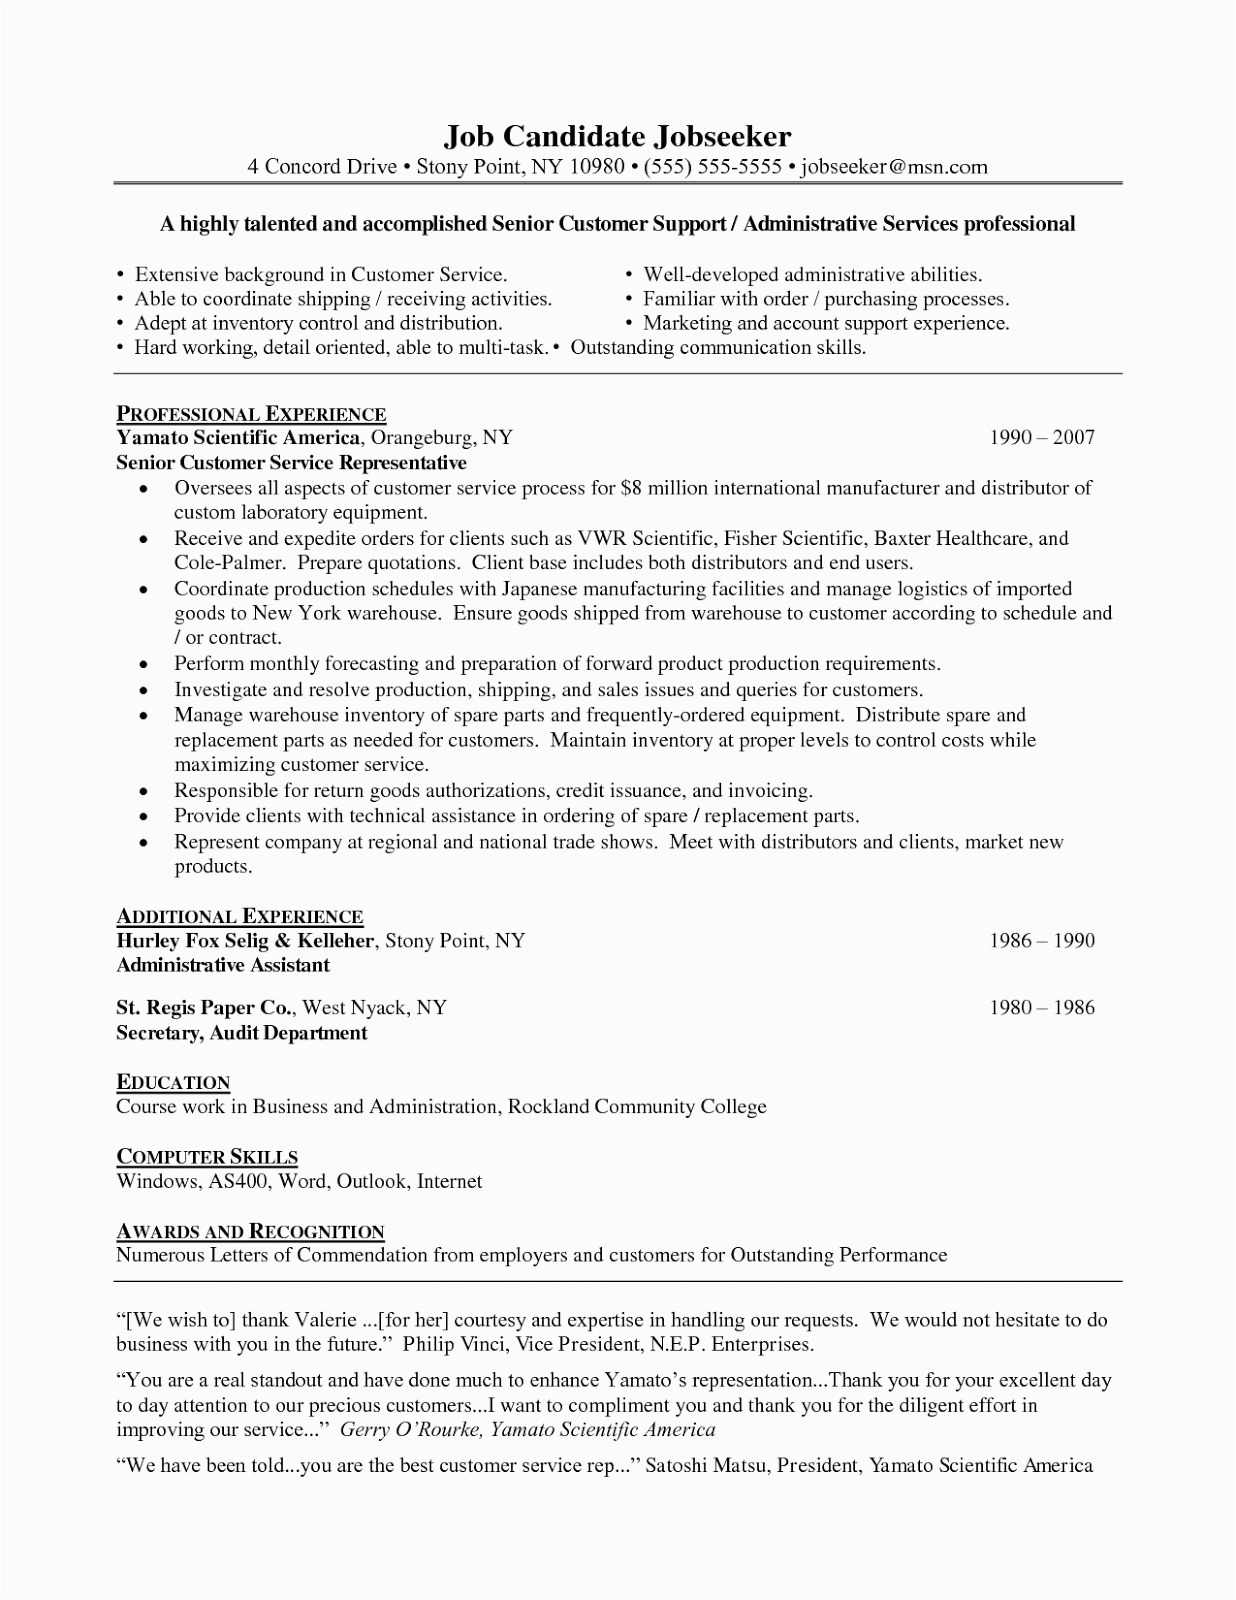 Samples Of Objectives for Customer Service Resumes Career Objective for Customer Service Resume